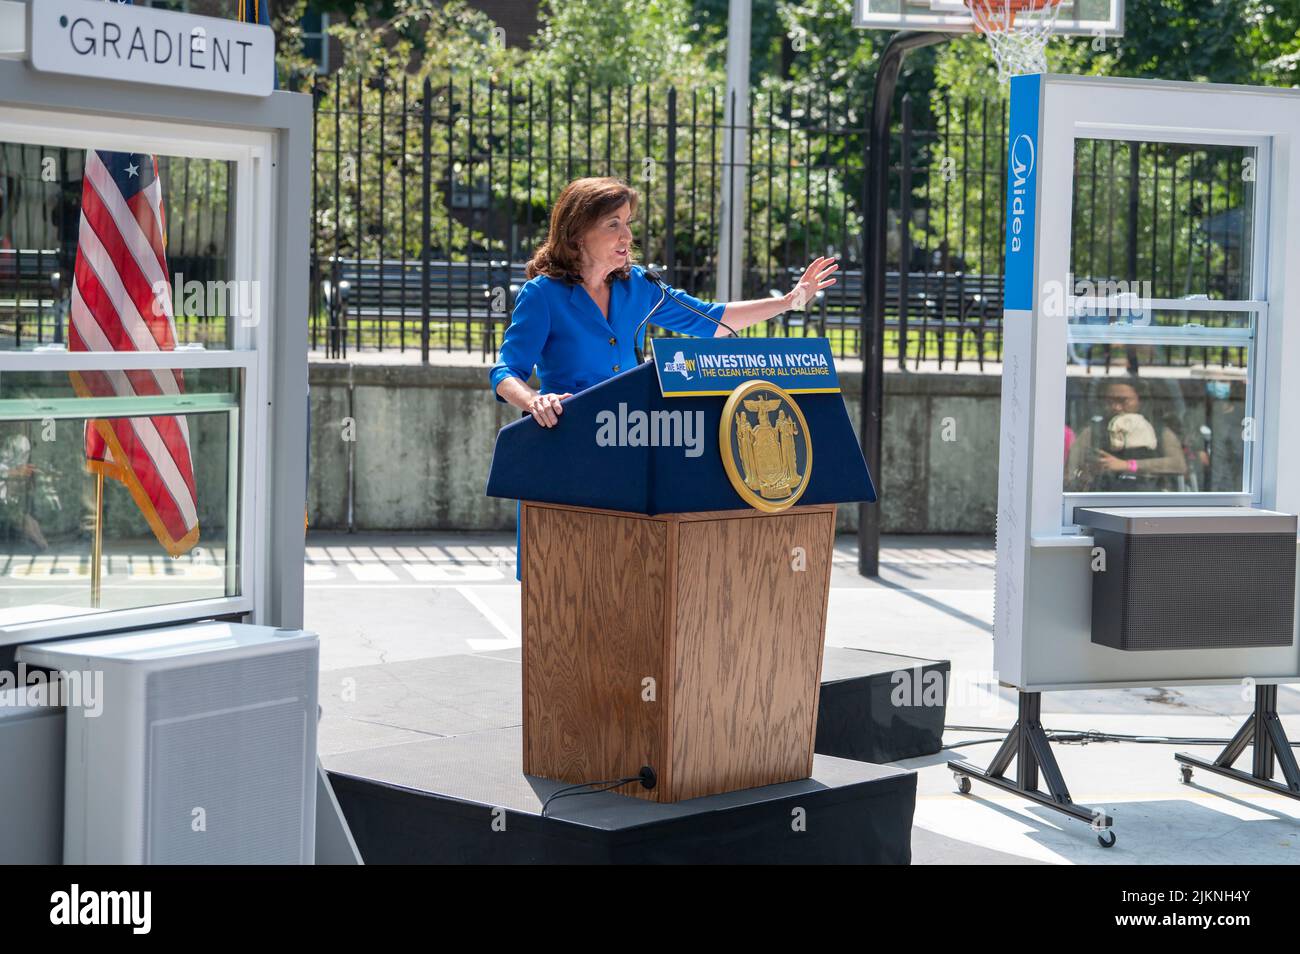 Governor Kathy Hochul speaks during a joint housing and clean energy-related announcement at Woodside Houses NYCHA complex in Queens Borough of New York City. Governor Hochul and Mayor Adams announce $70 million initial investment to decarbonize NYCHA buildings as part of clean heat for all challenge. The plan calls for the installation of what's called an 'electric heat pump', developed by NYPA selected Midea America and Gradient, in 30,000 units, which would provide tenants in each apartment with the ability to control the heat or keep their units cool throughout the year. Stock Photo